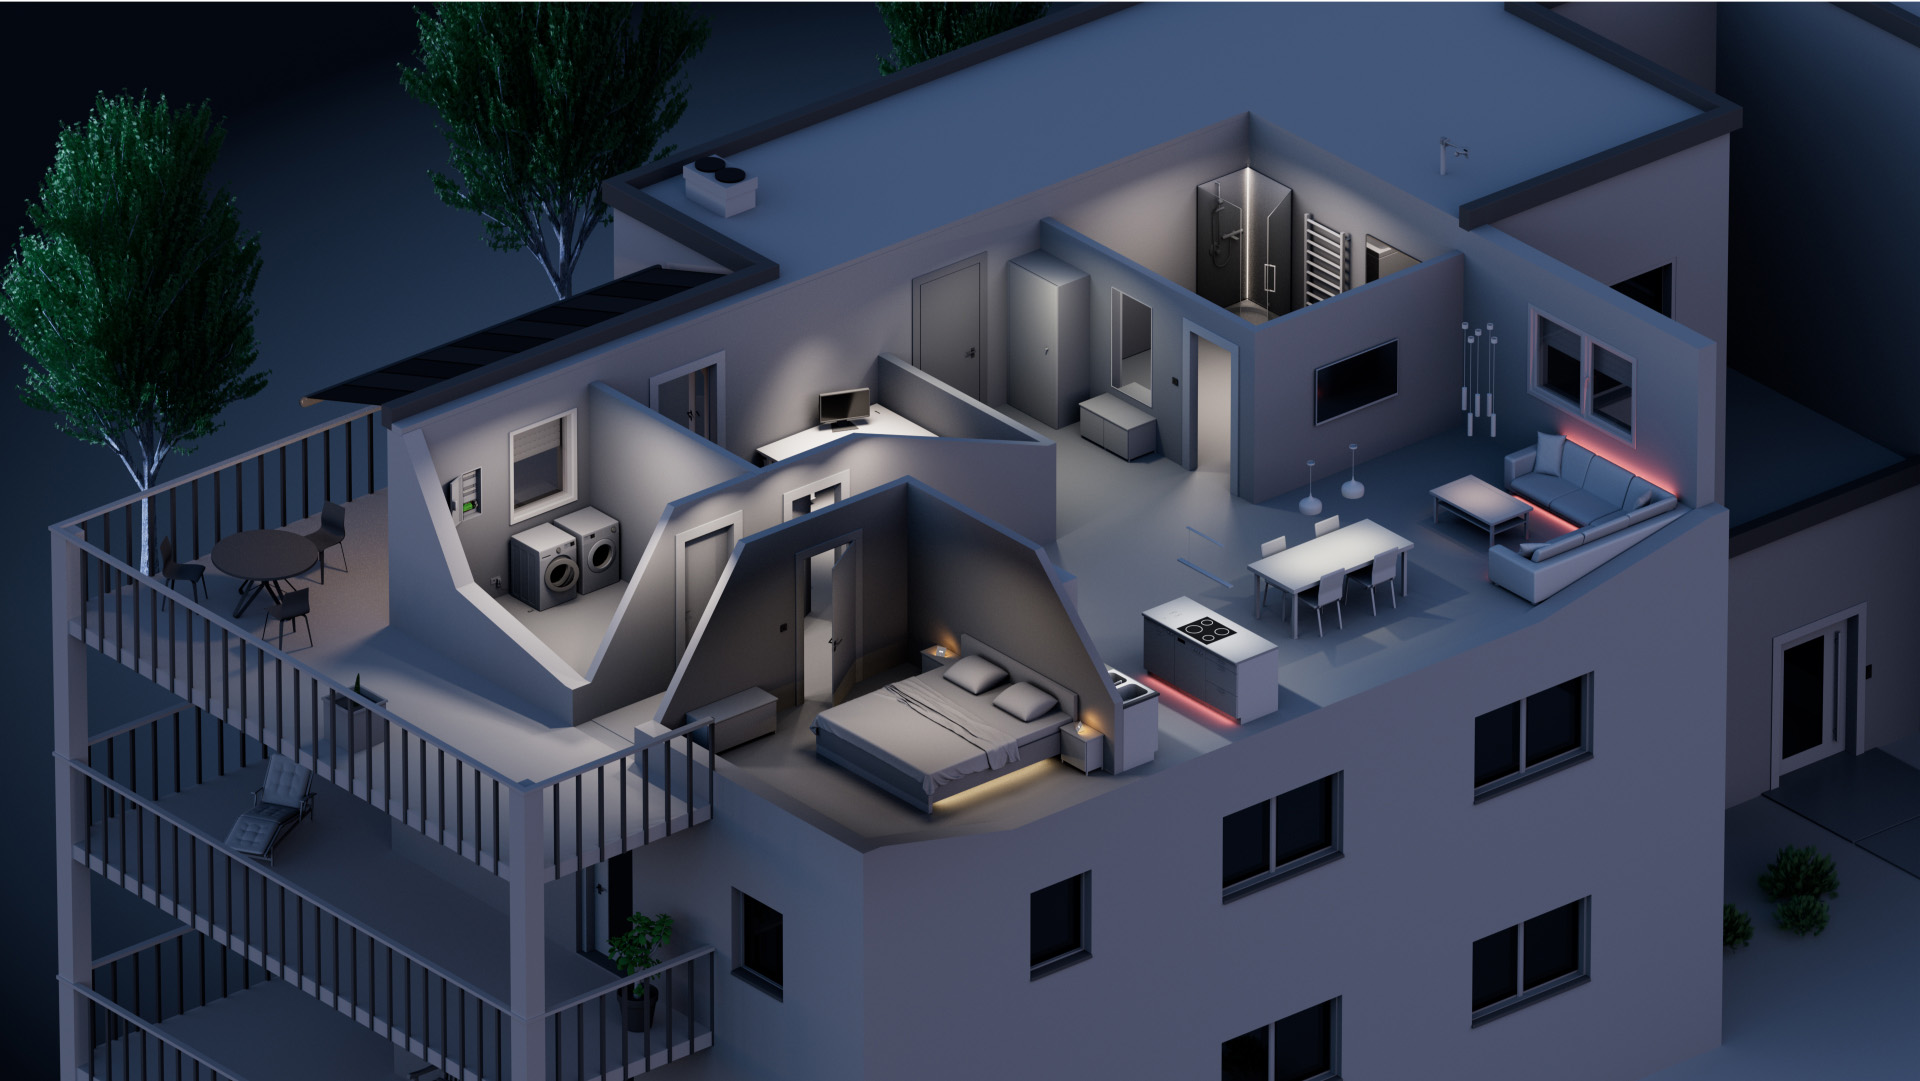 An image of an apartment on which the use of building automation was visualized as an example.